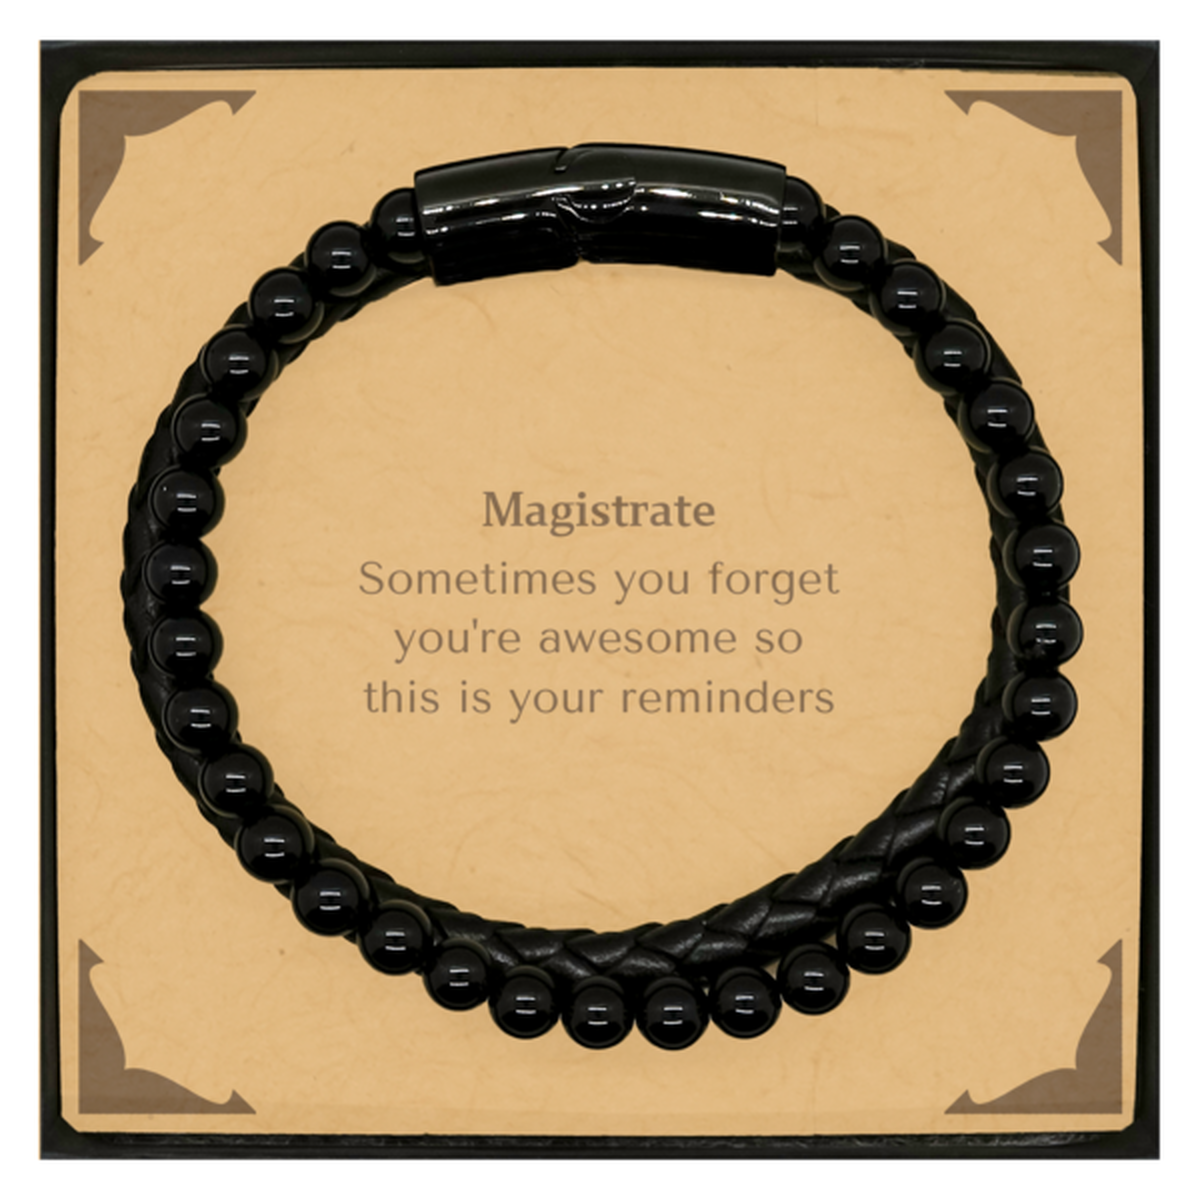 Sentimental Magistrate Stone Leather Bracelets, Magistrate Sometimes you forget you're awesome so this is your reminders, Graduation Christmas Birthday Gifts for Magistrate, Men, Women, Coworkers